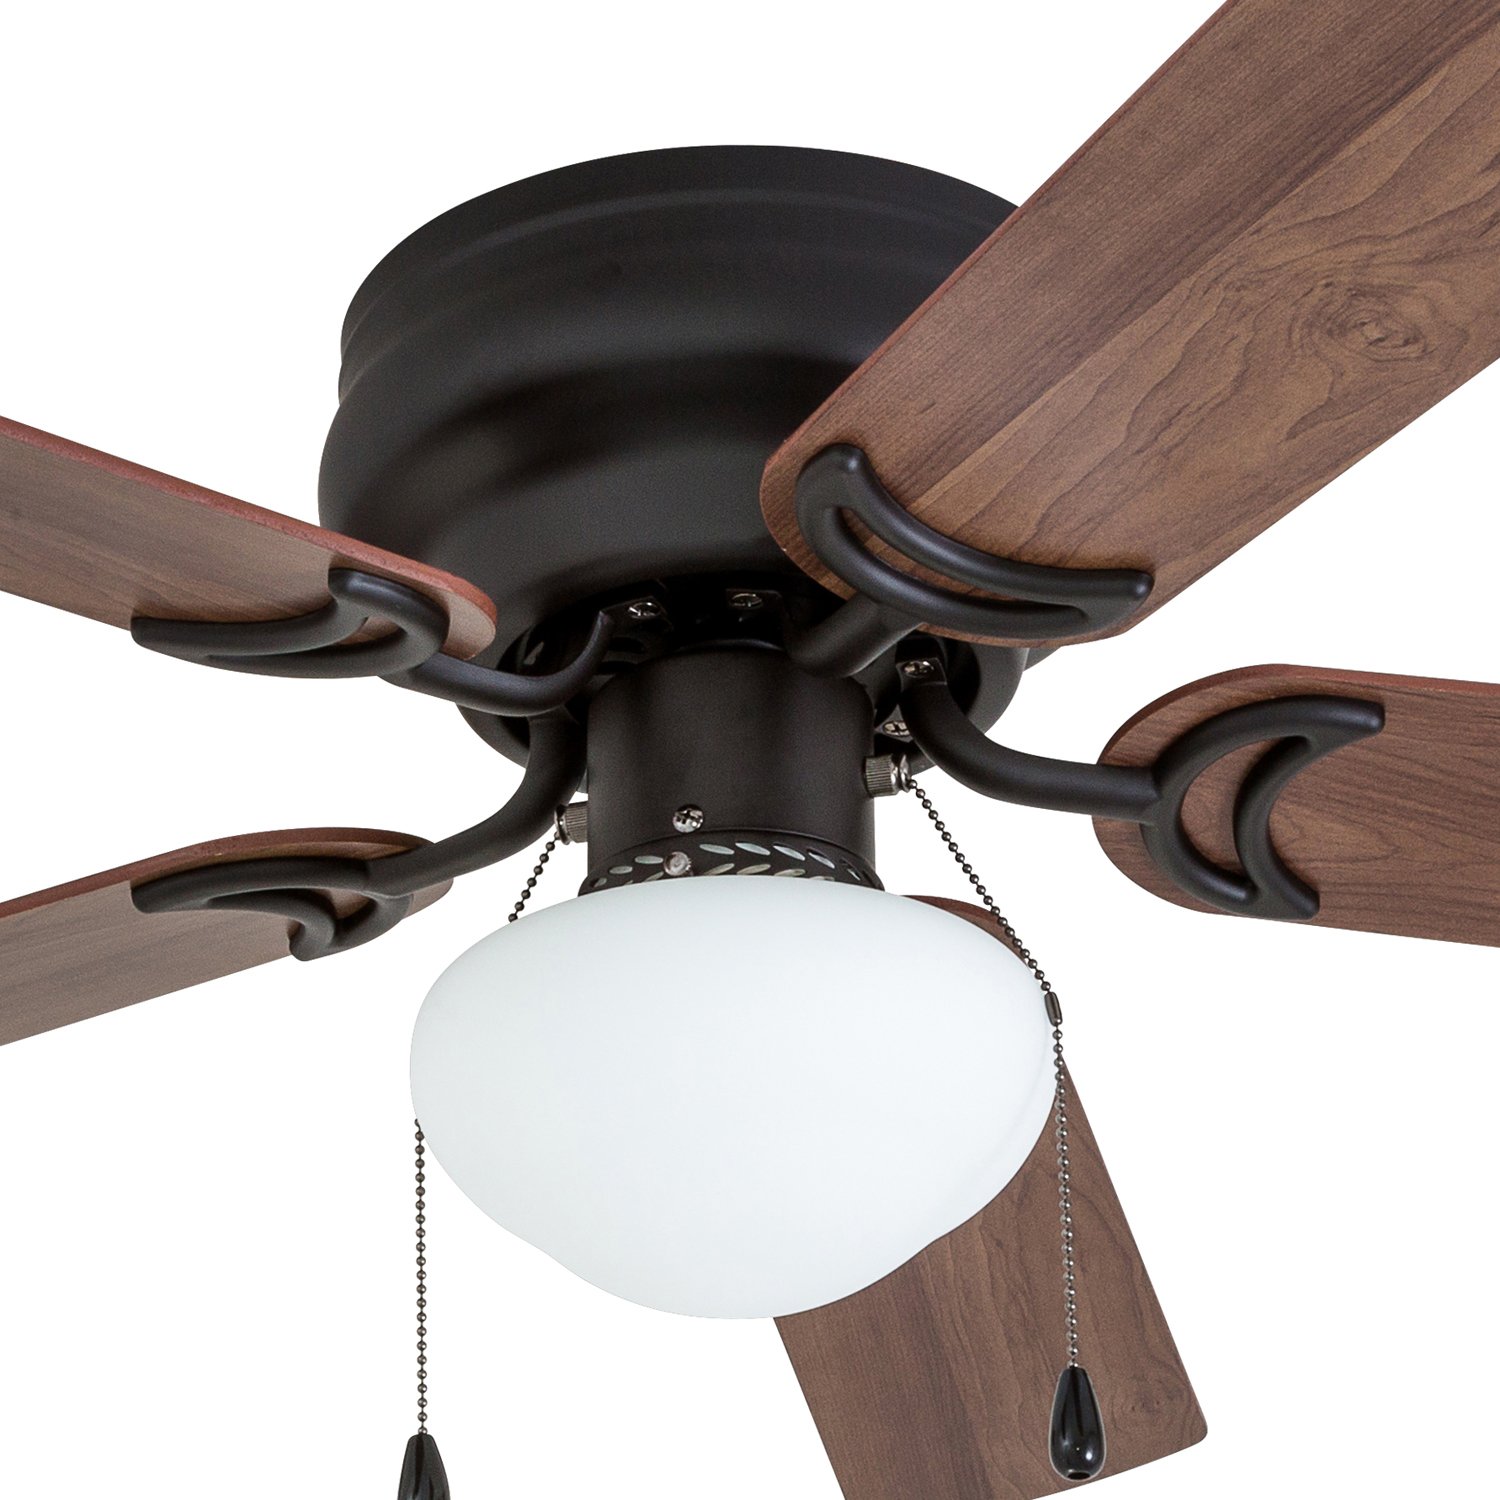 Prominence Home Alvina, 42 Inch Traditional Flush Mount Indoor LED Ceiling Fan with Light, Pull Chain, Dual Finish Blades, Reversible Motor - 50860-01 (Bronze)